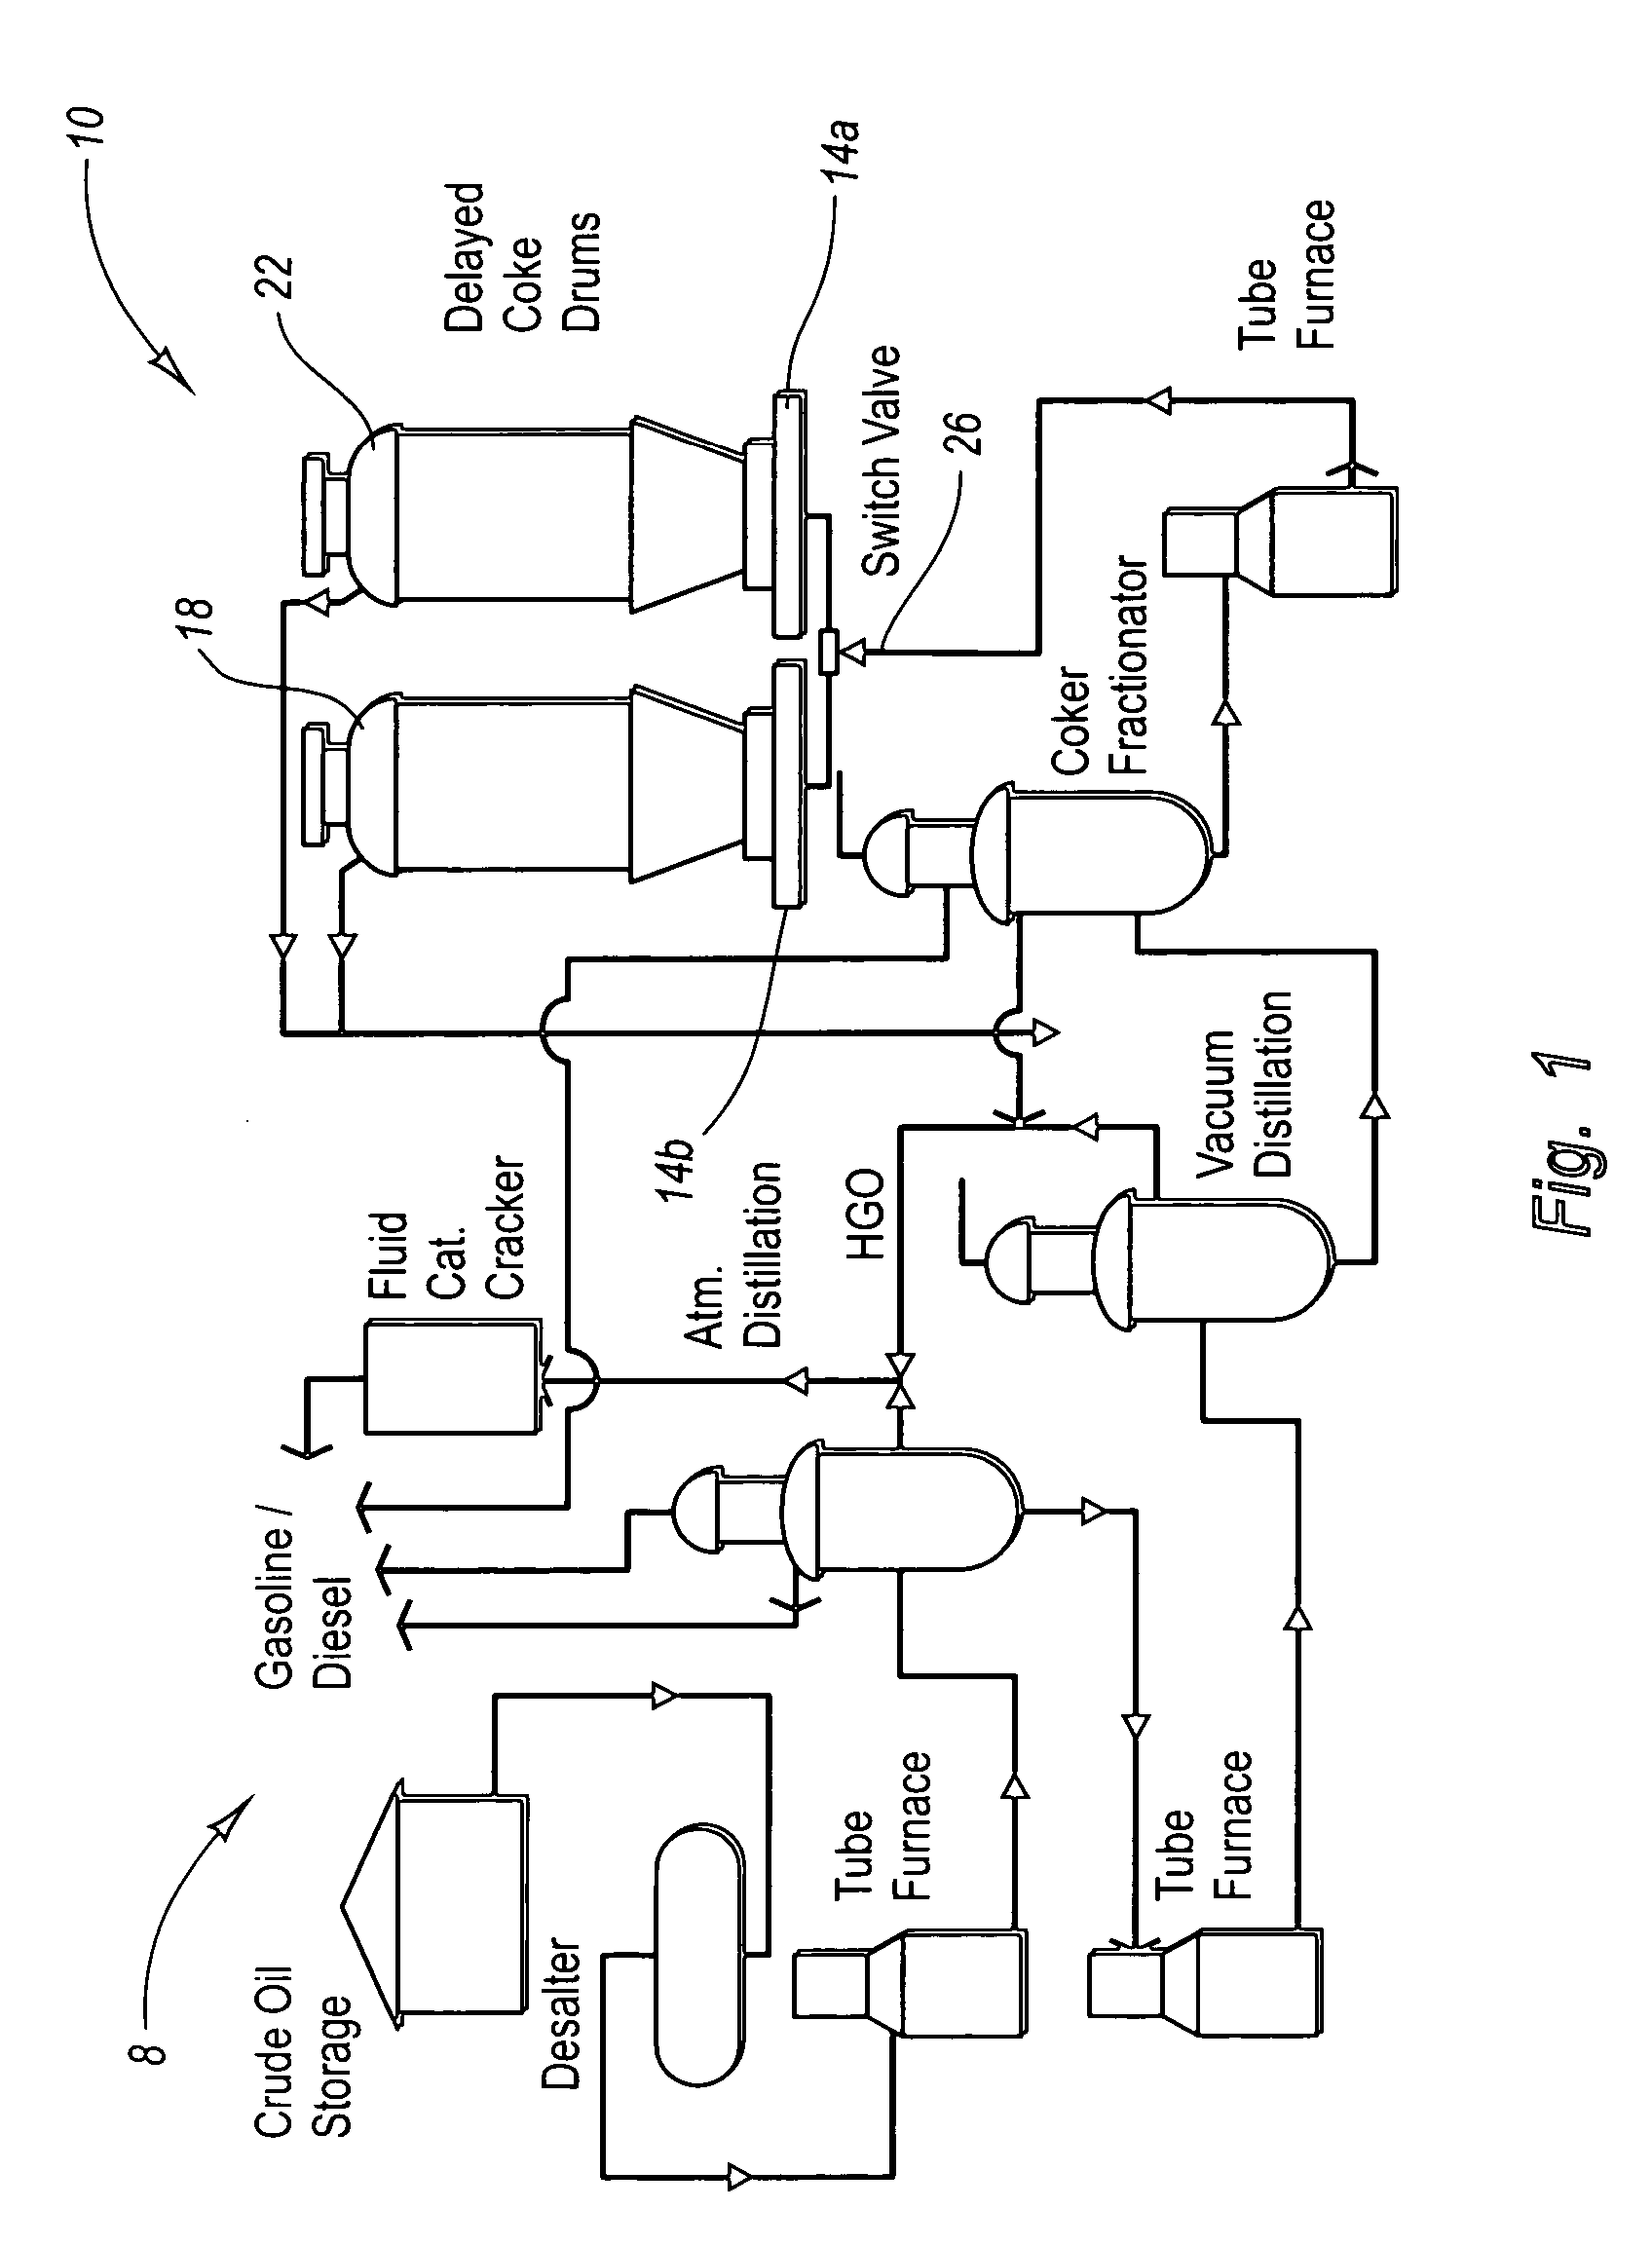 Systems and methods for providing continuous containment of delayed coker unit operations